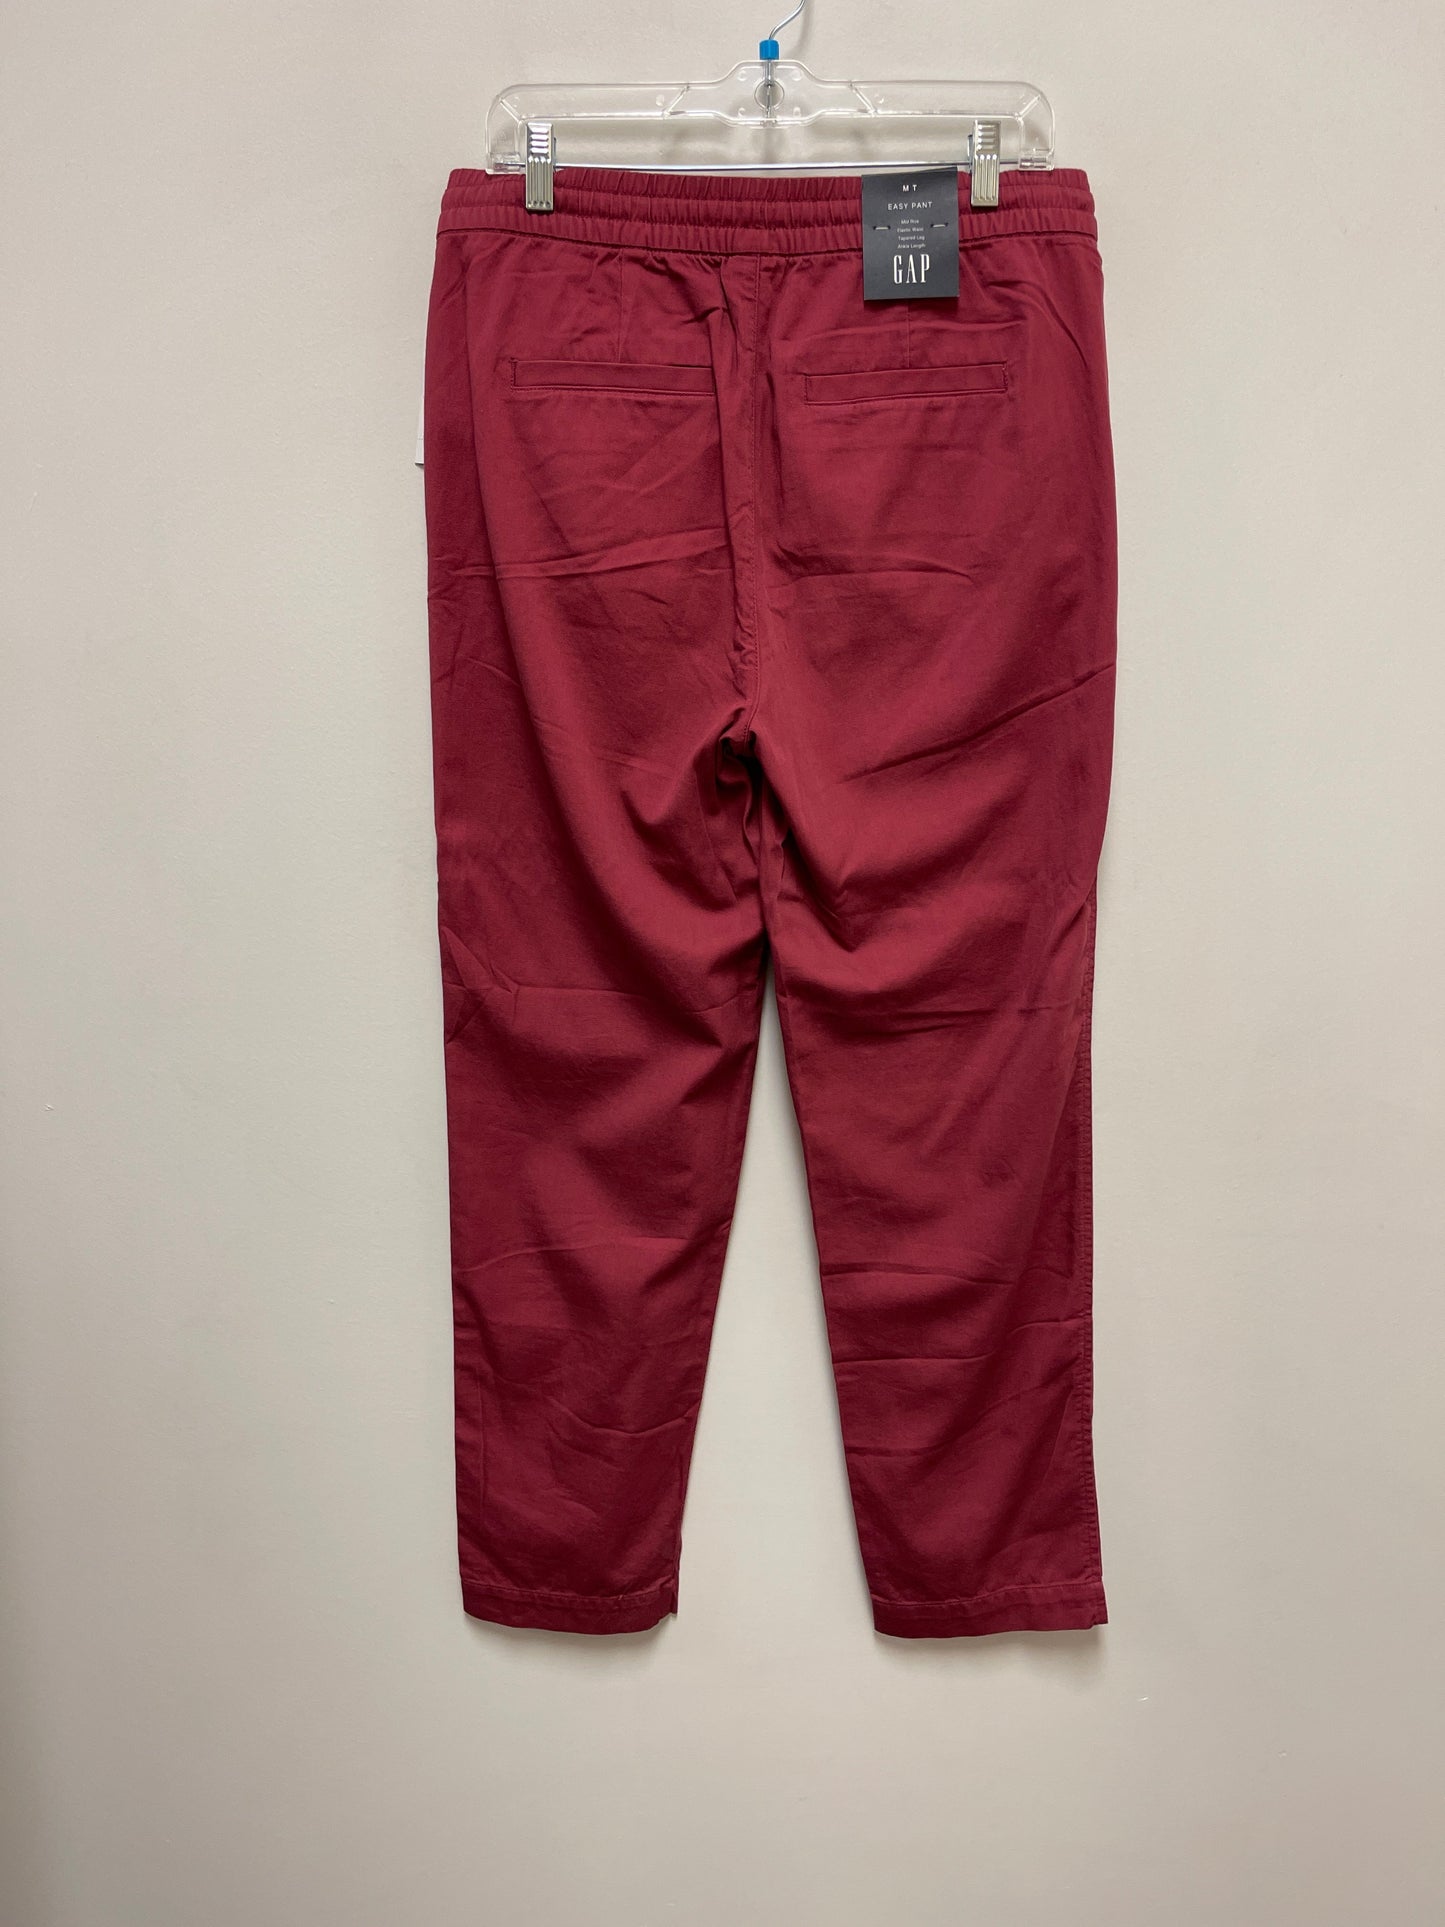 Red Pants Other Gap, Size 8